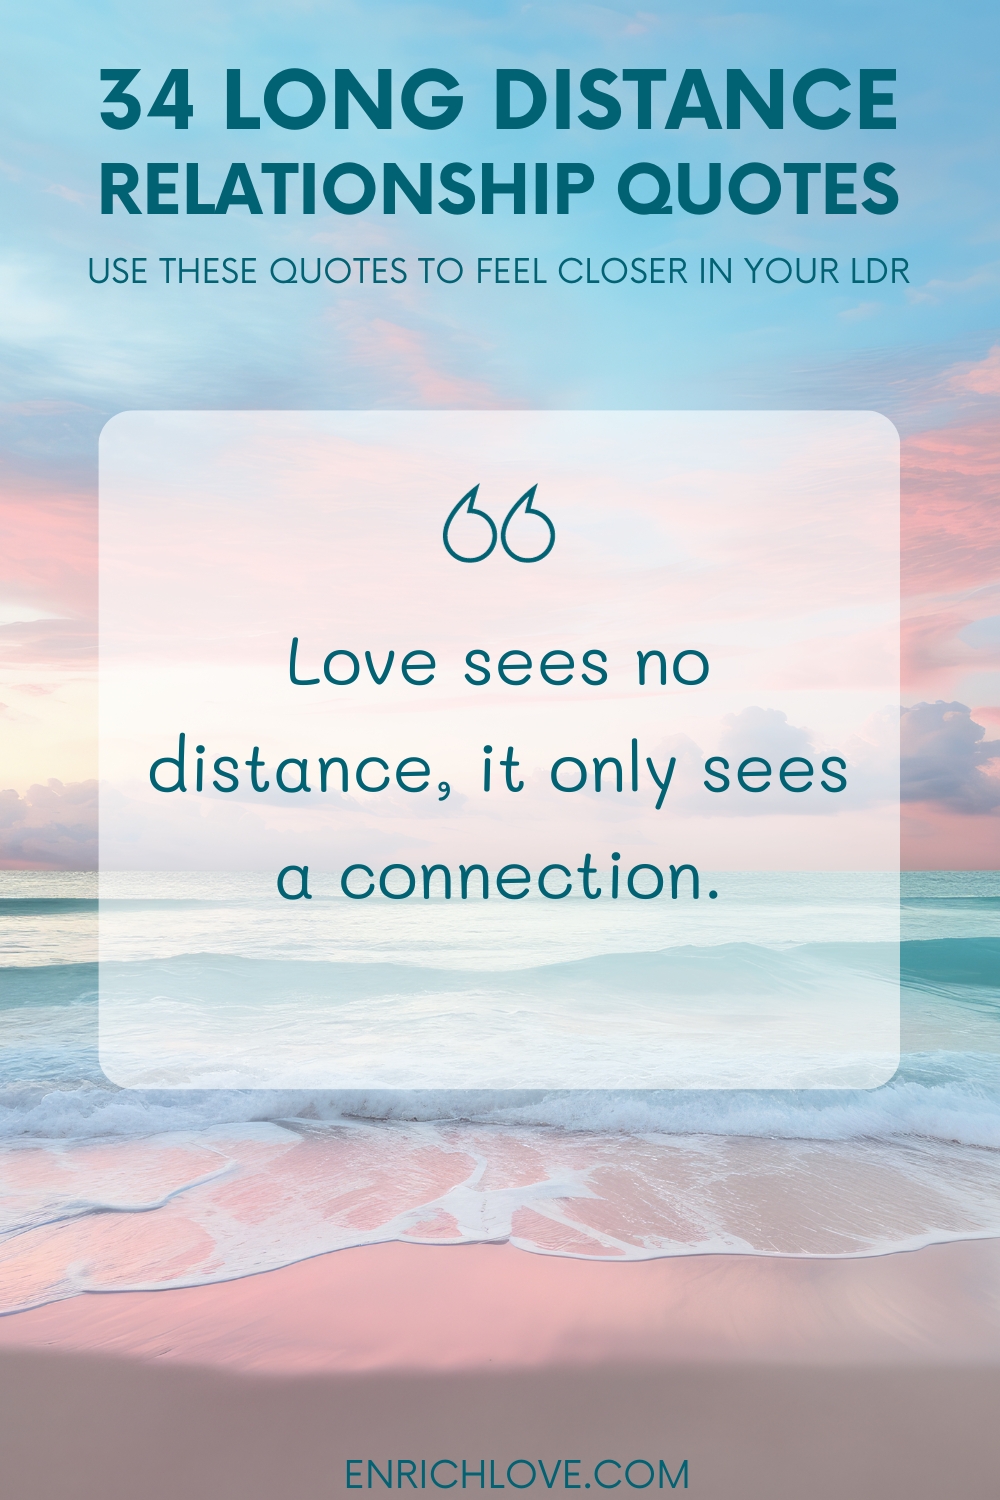 34 Long Distance Relationship Quotes - Love sees no distance, it only sees a connection.